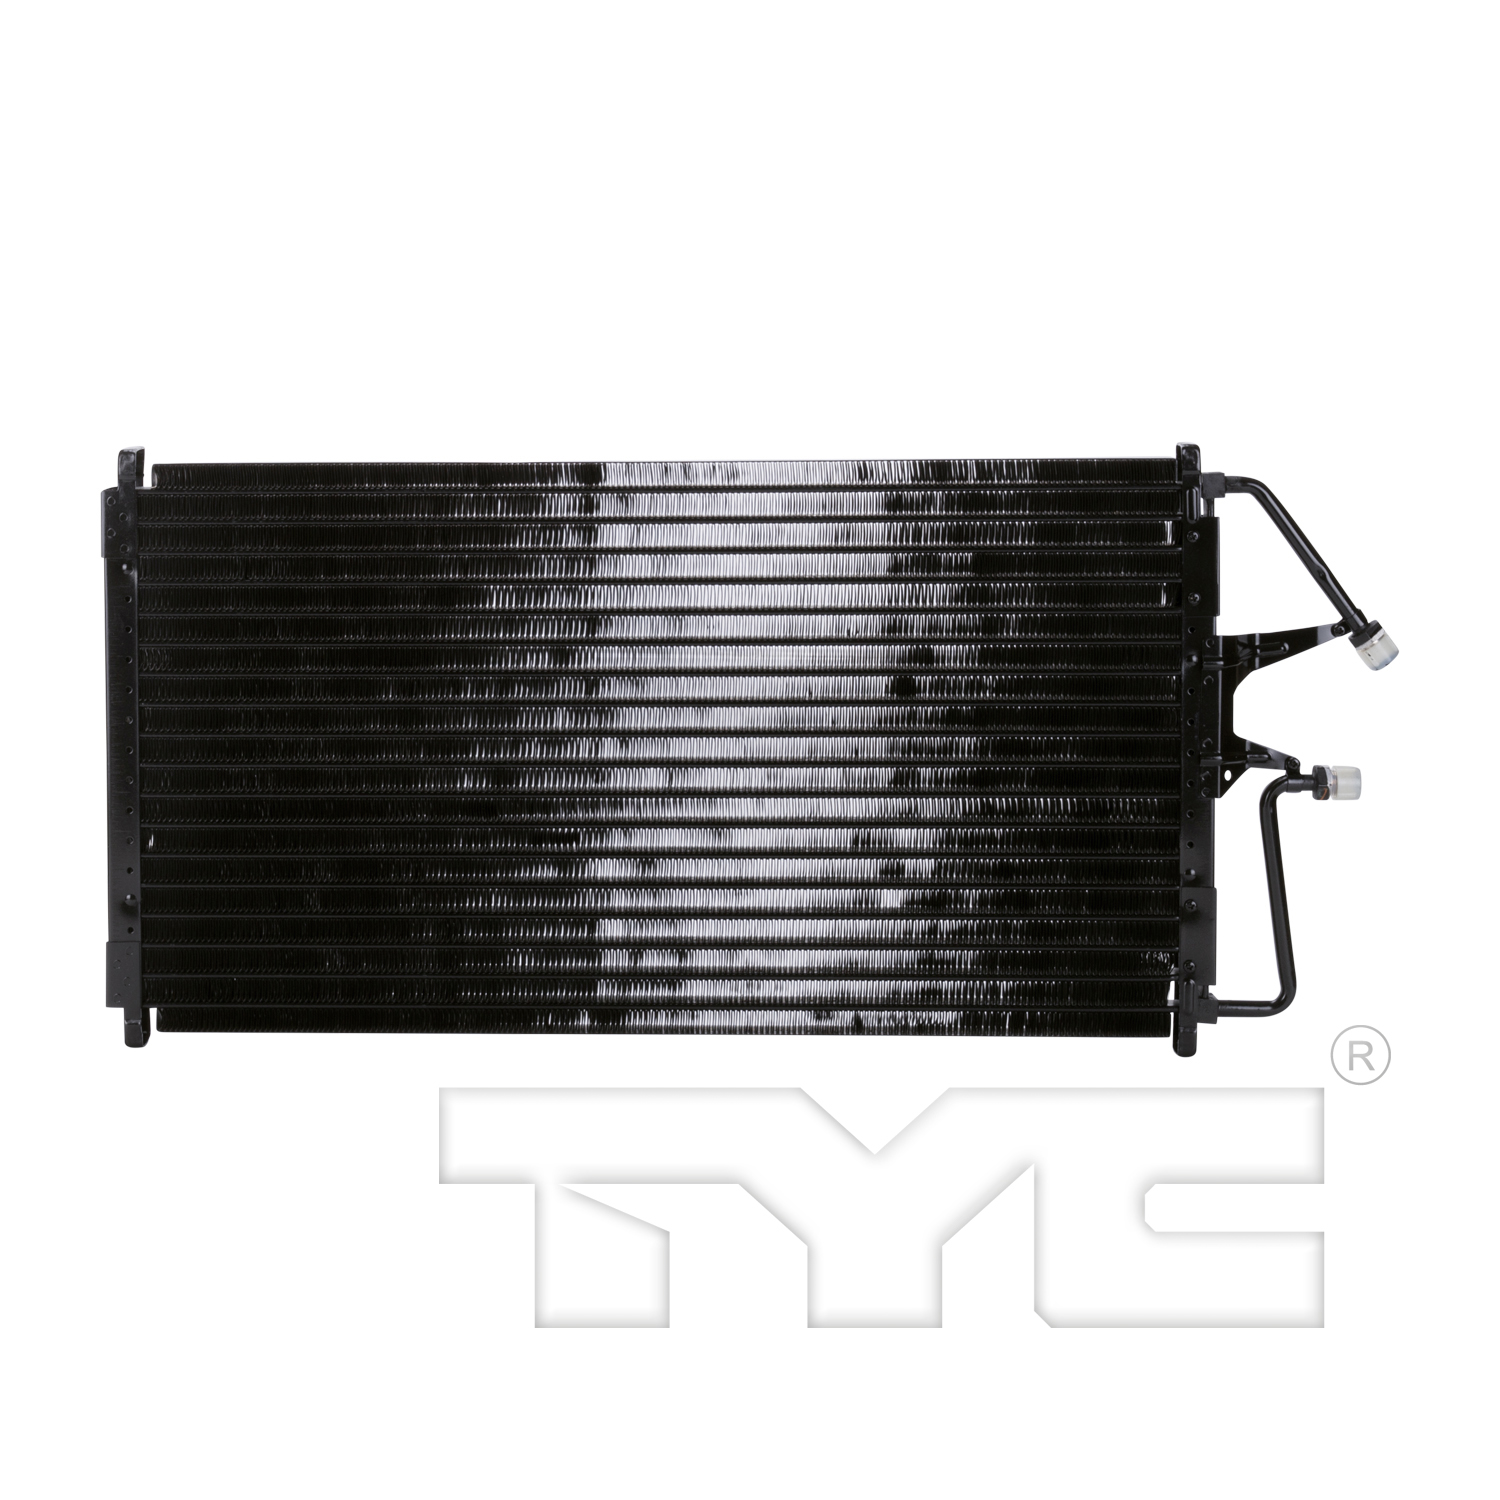 Aftermarket AC CONDENSERS for GMC - K2500 SUBURBAN, K2500 SUBURBAN,96-99,Air conditioning condenser